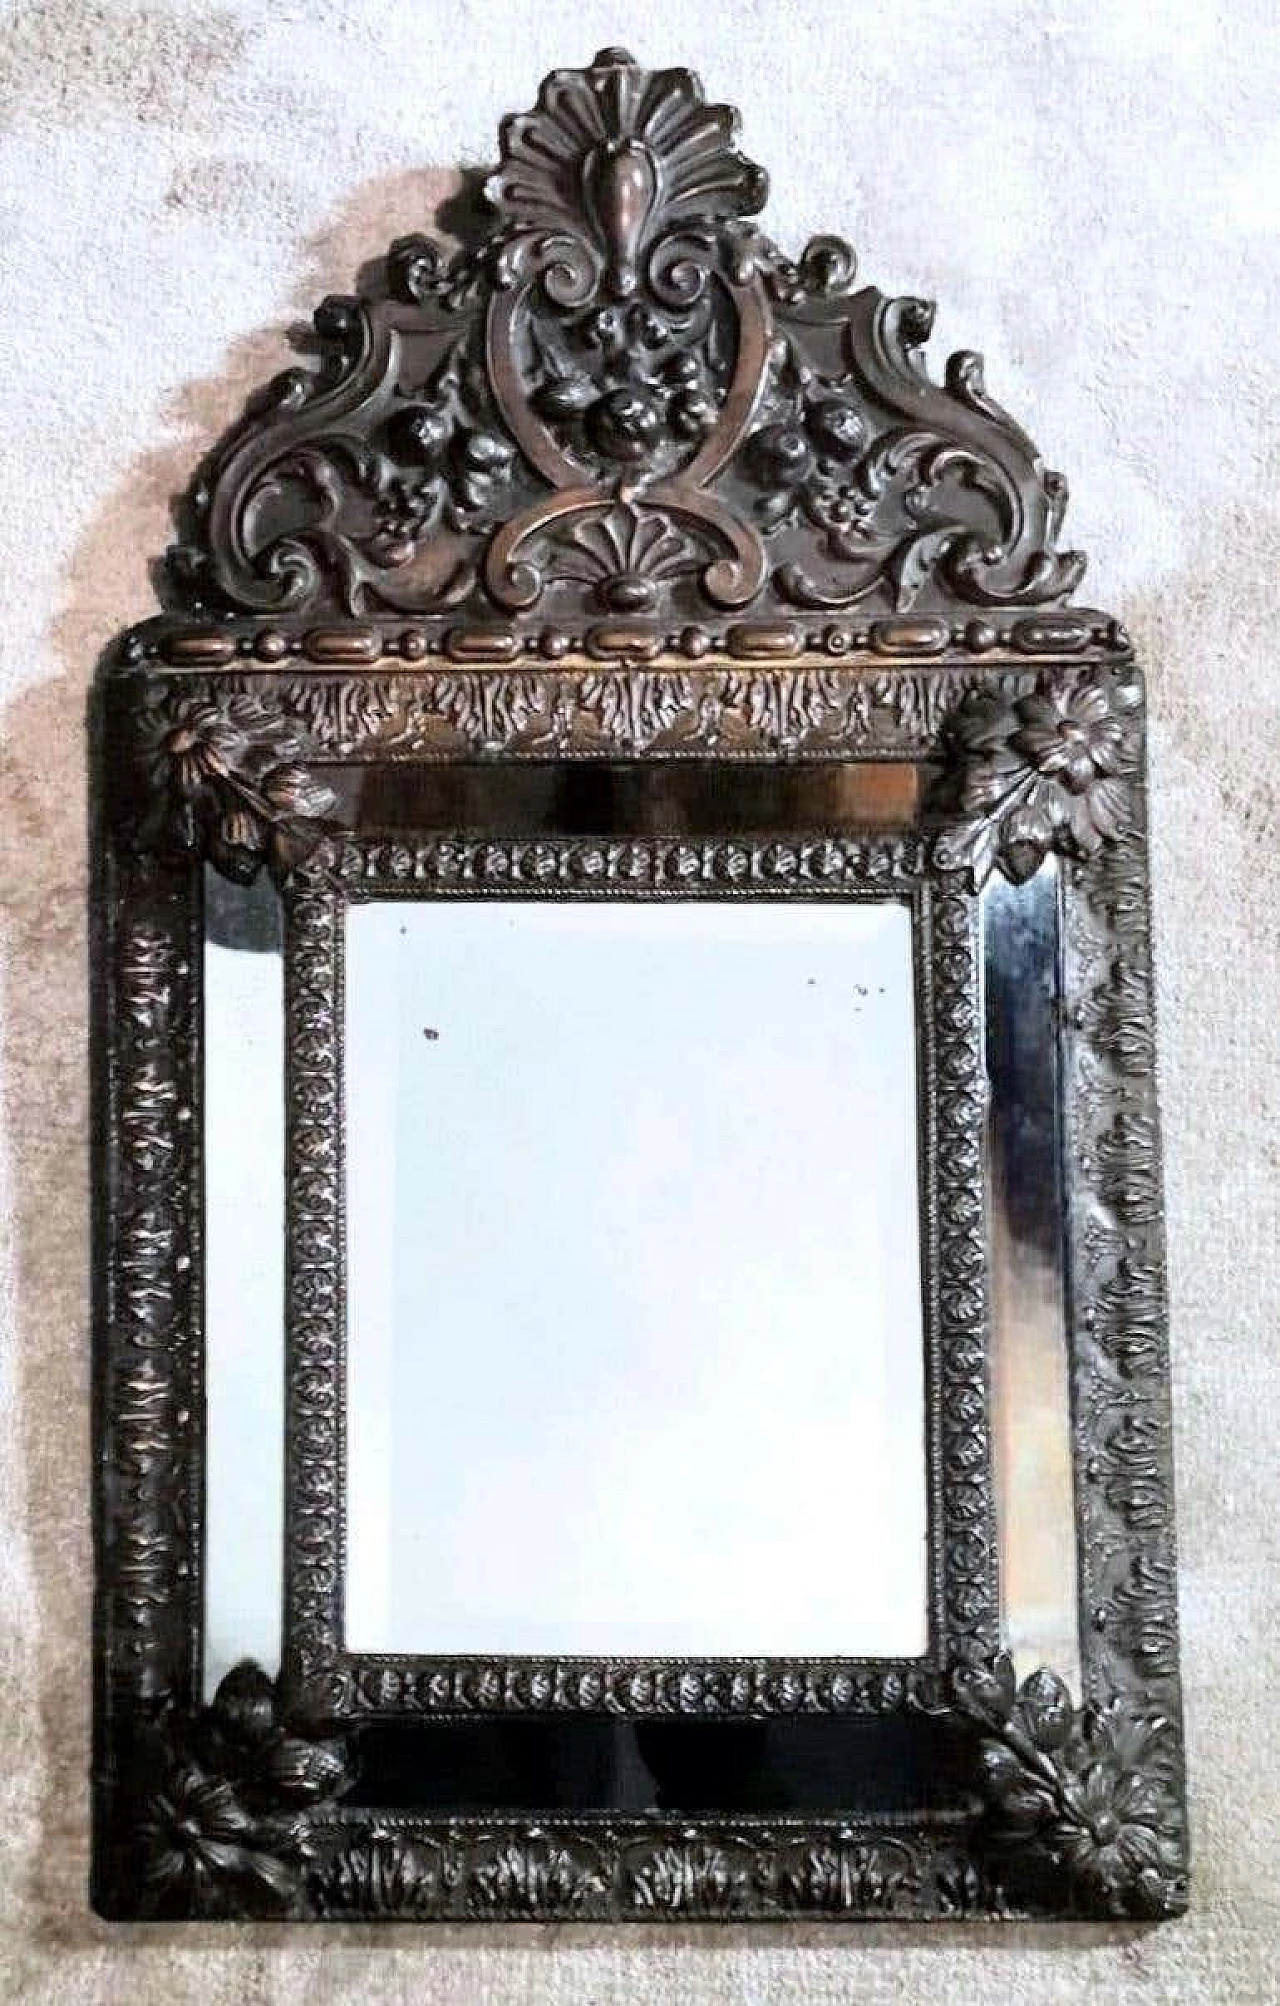 Napoleon III style wall mirror with repoussé work in burnished brass, mid-19th century 2